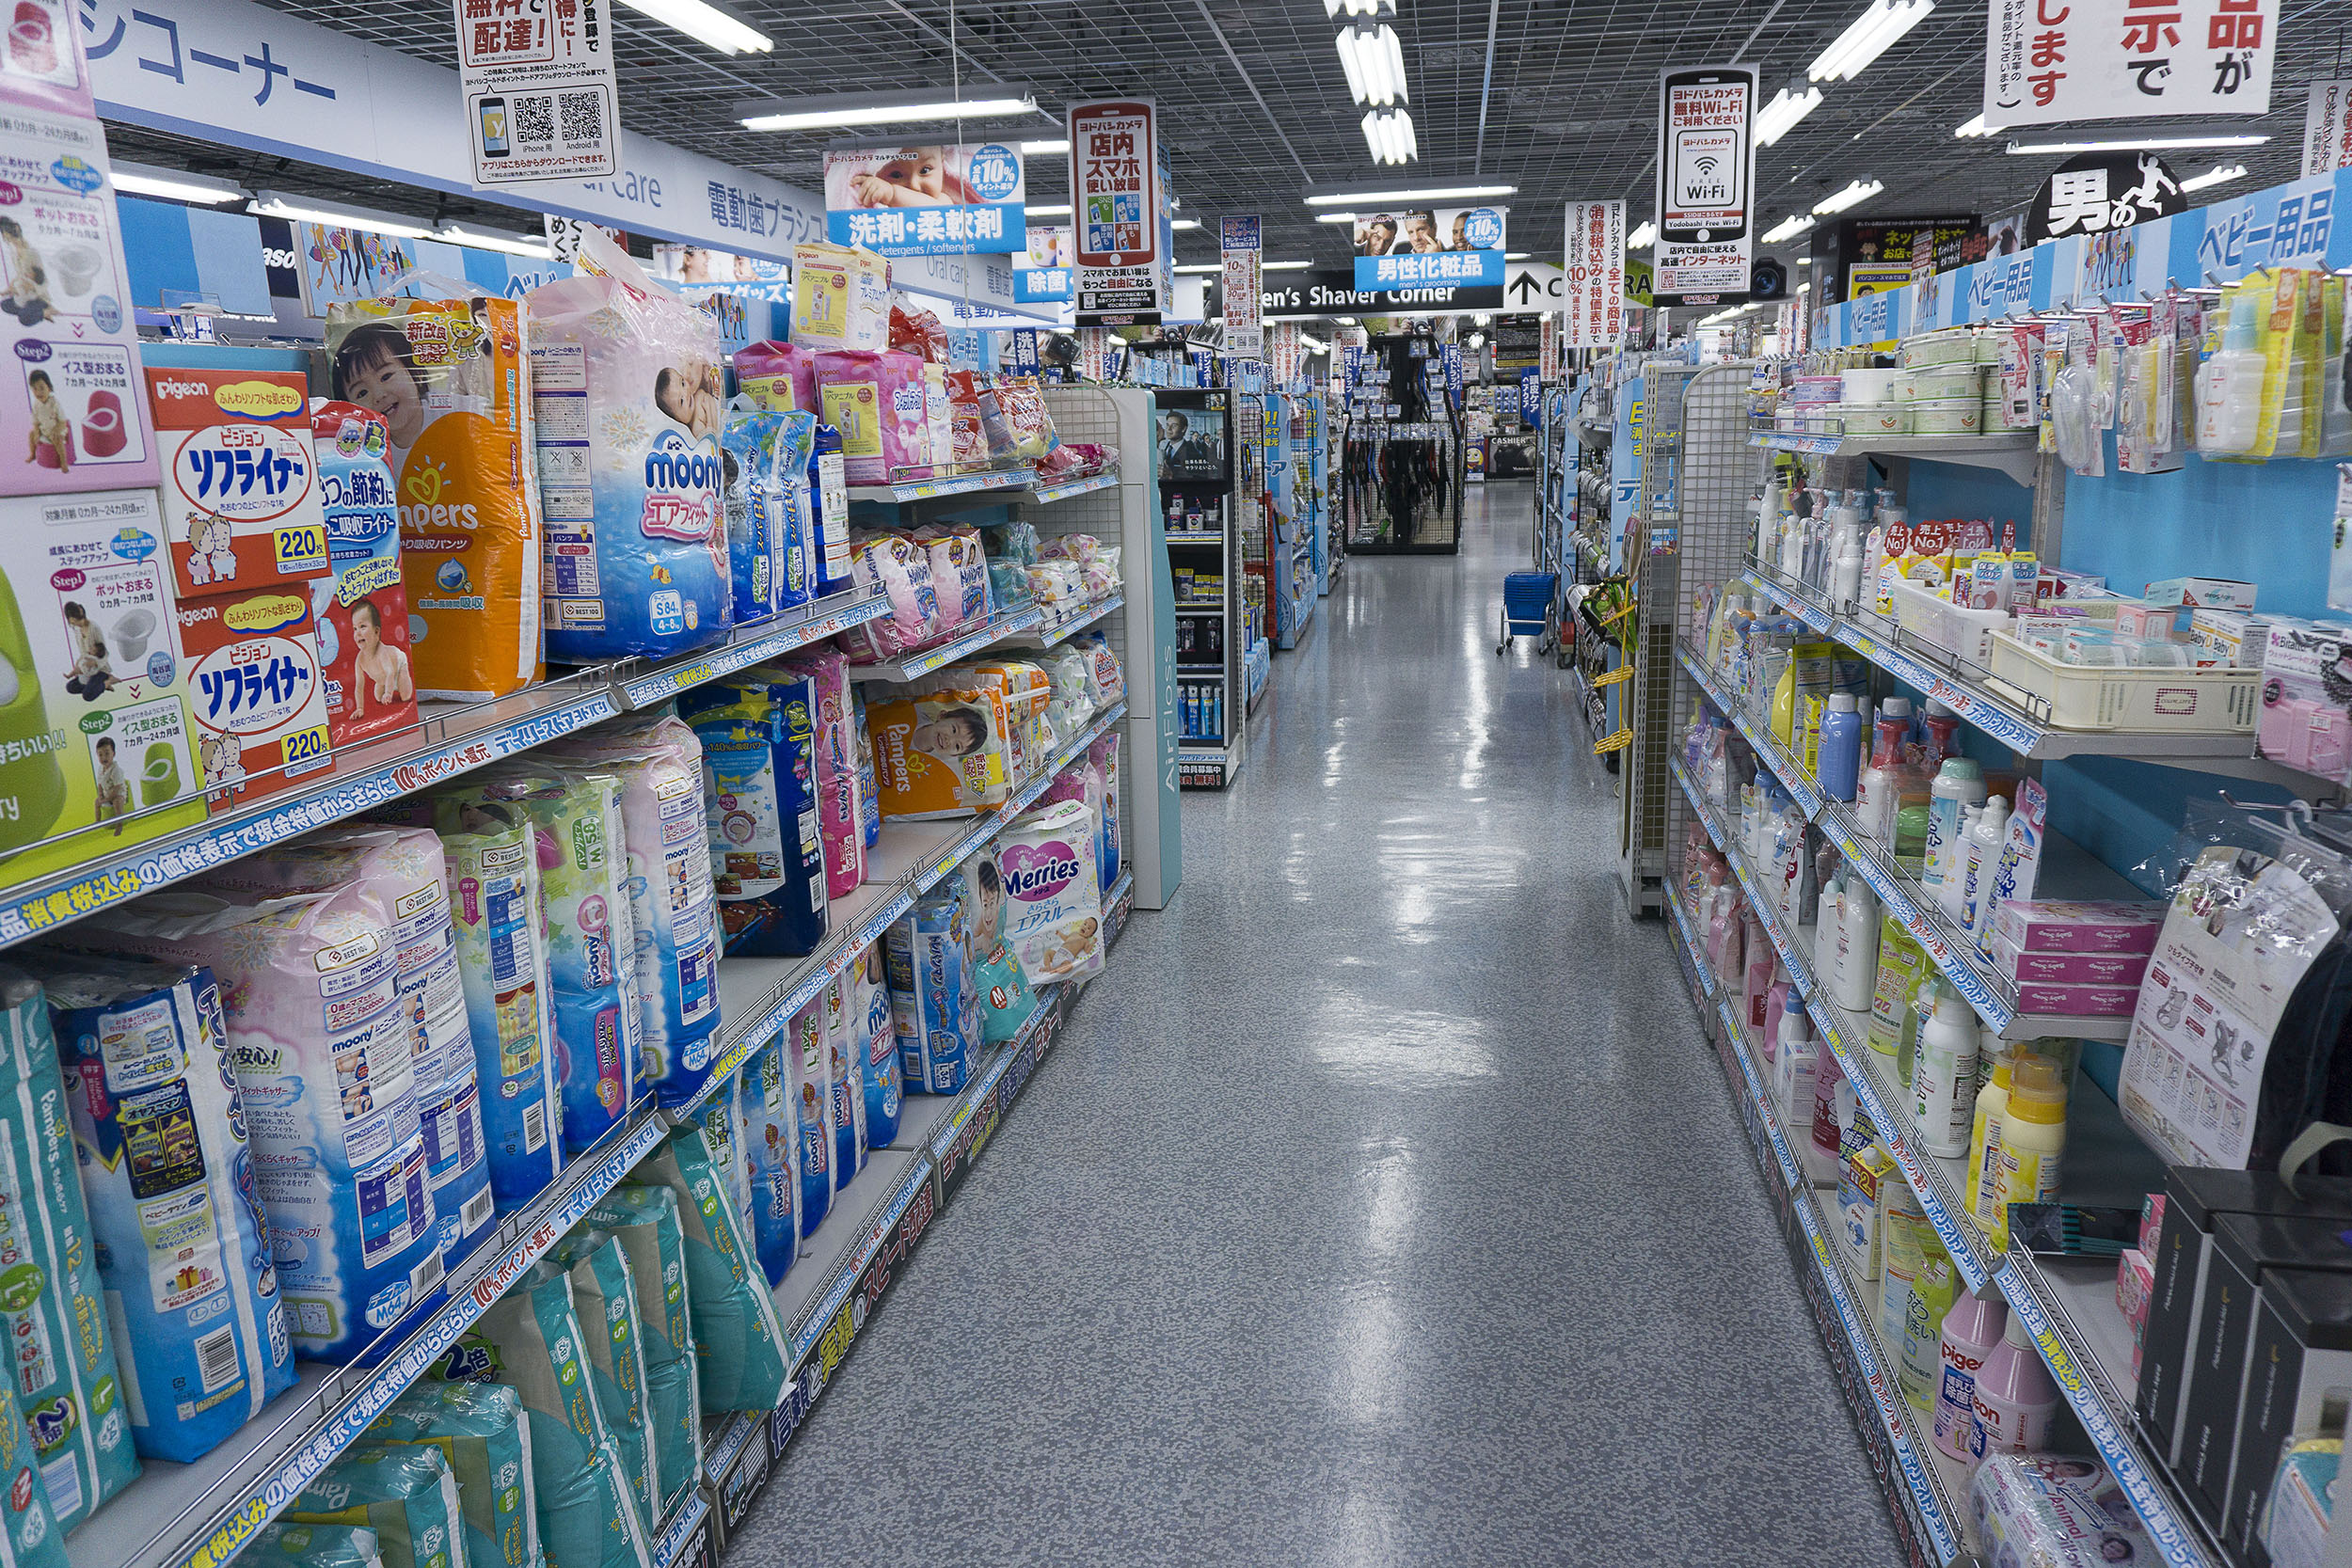 Buying nappies in Japan